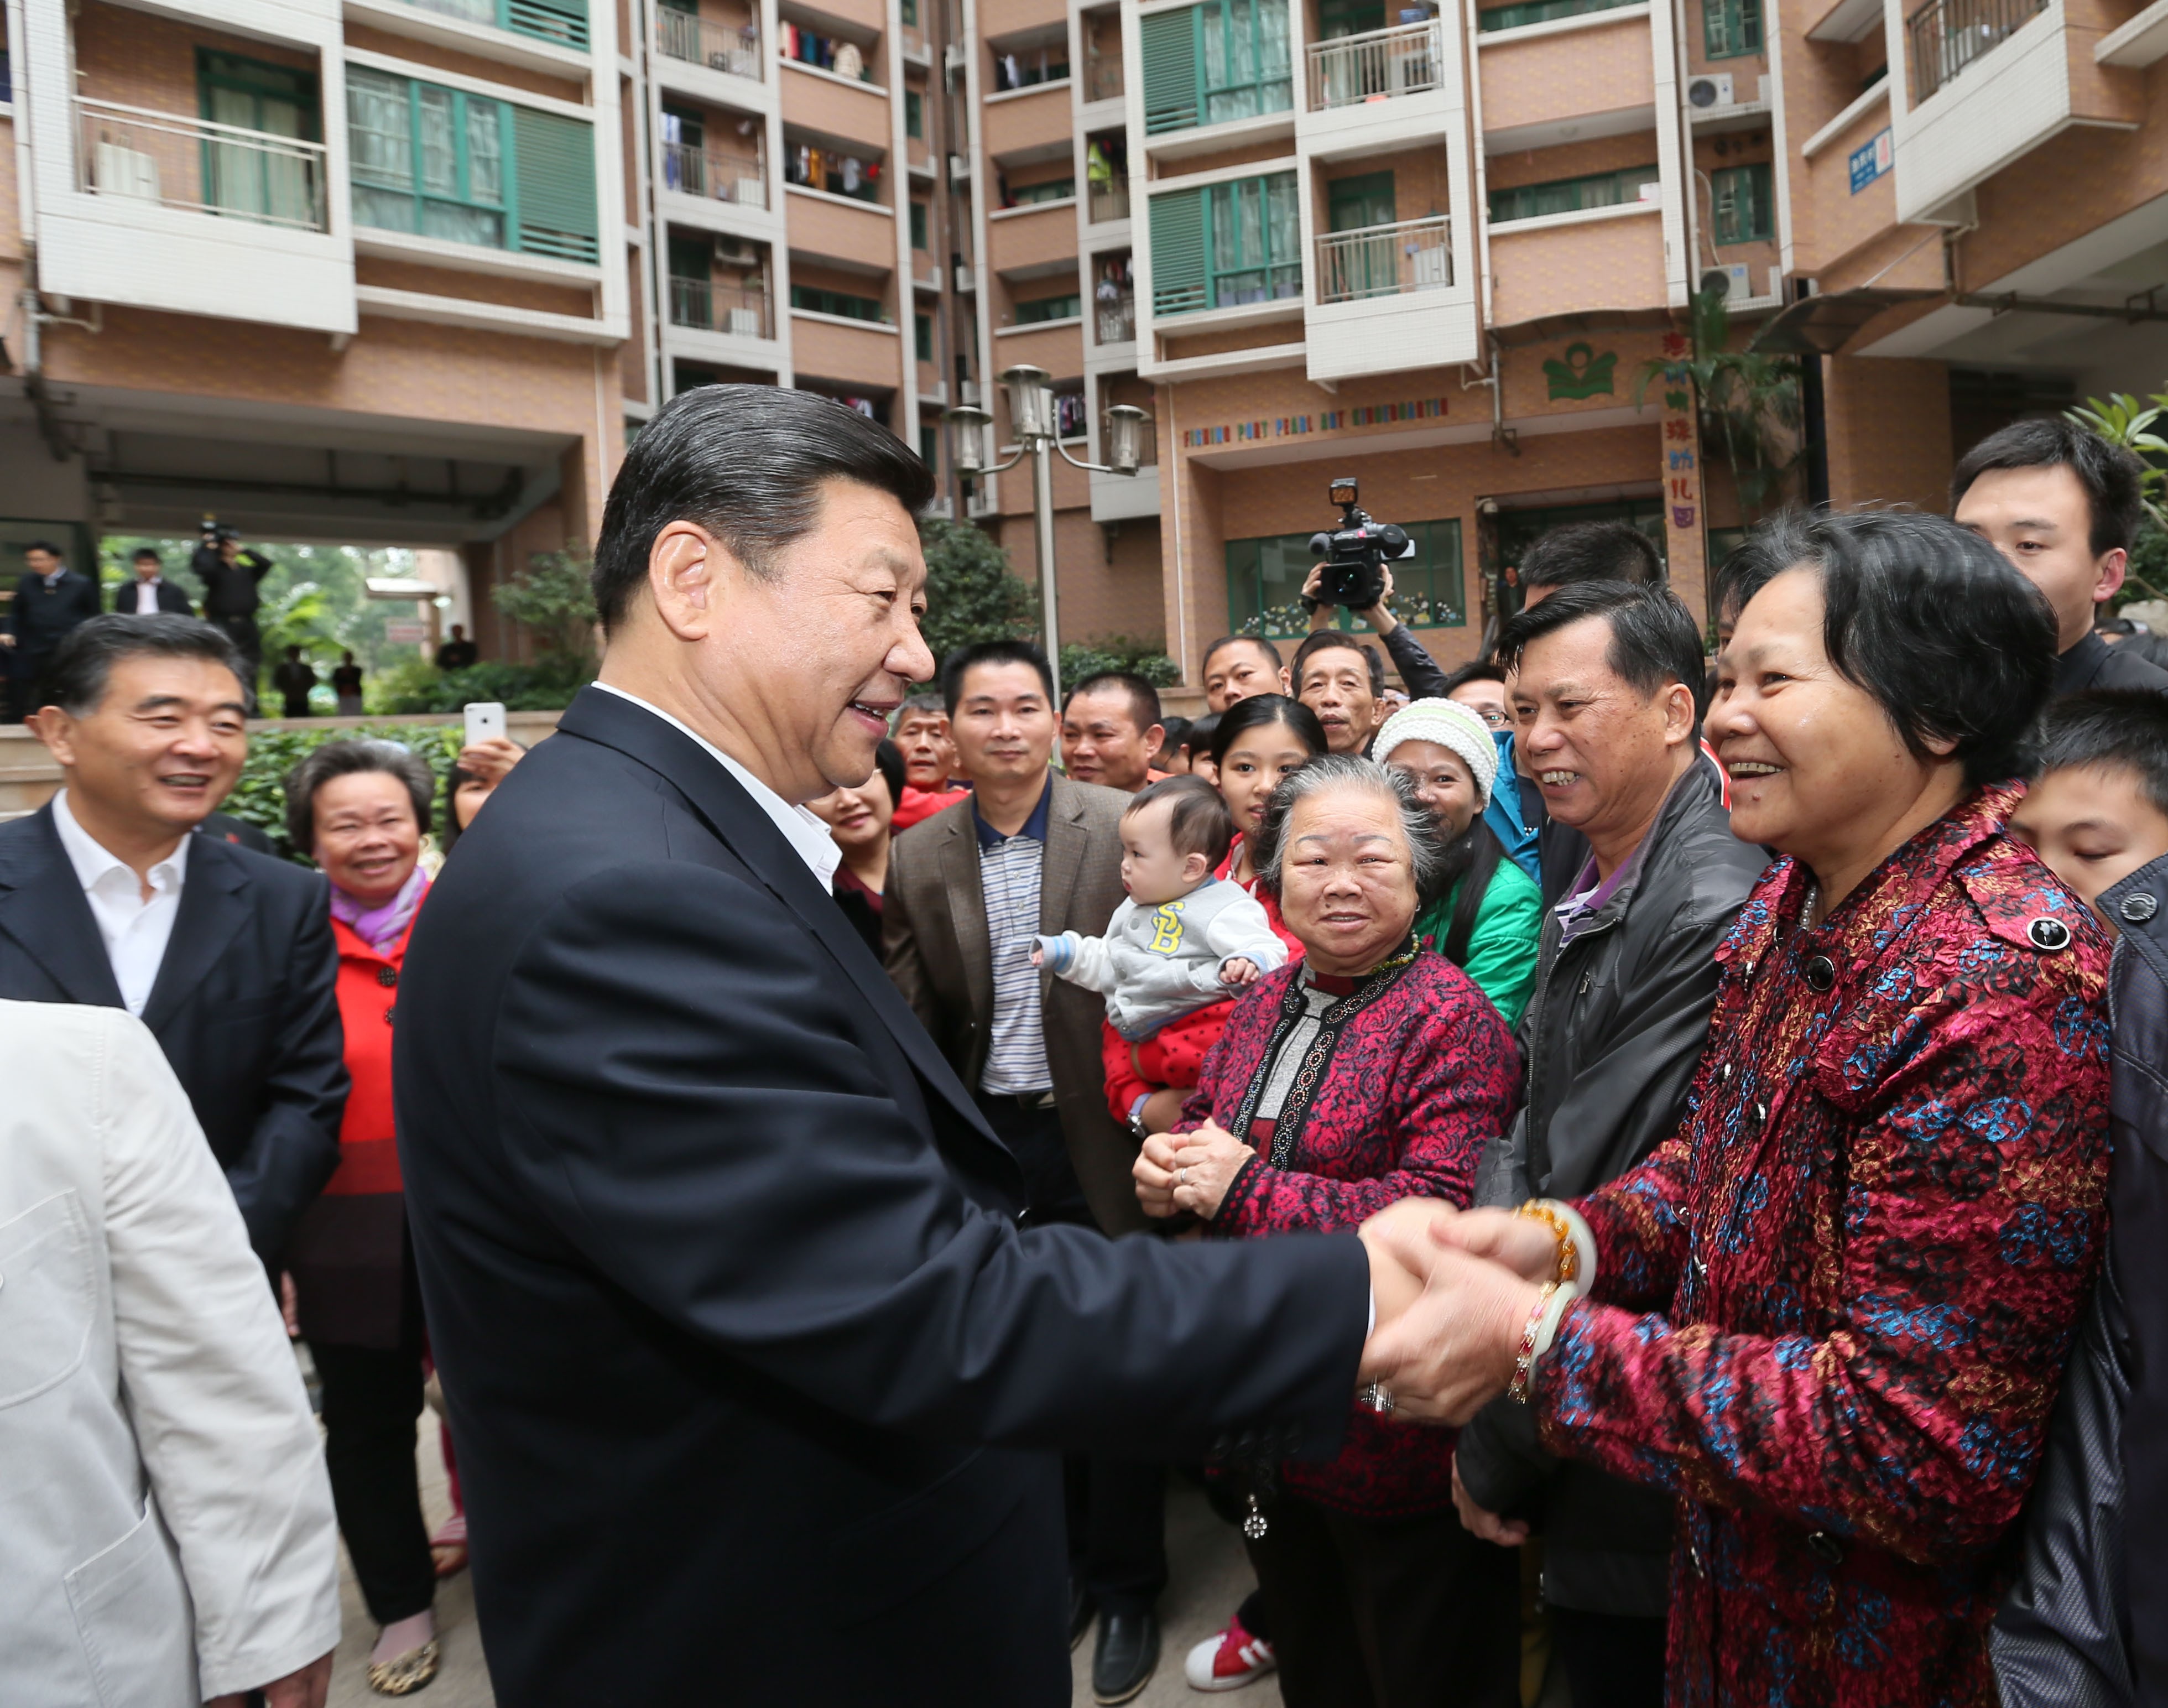 Xi Jinping meets locals during an inspection tour of Shenzhen in December 2012, shortly after taking over as general secretary of the Communist Party. The move was interpreted as a tribute to the famous southern tour of Deng Xiaoping in 1992 and a commitment to deepen reform. Xi became president of China the following March. Photo: Xinhua